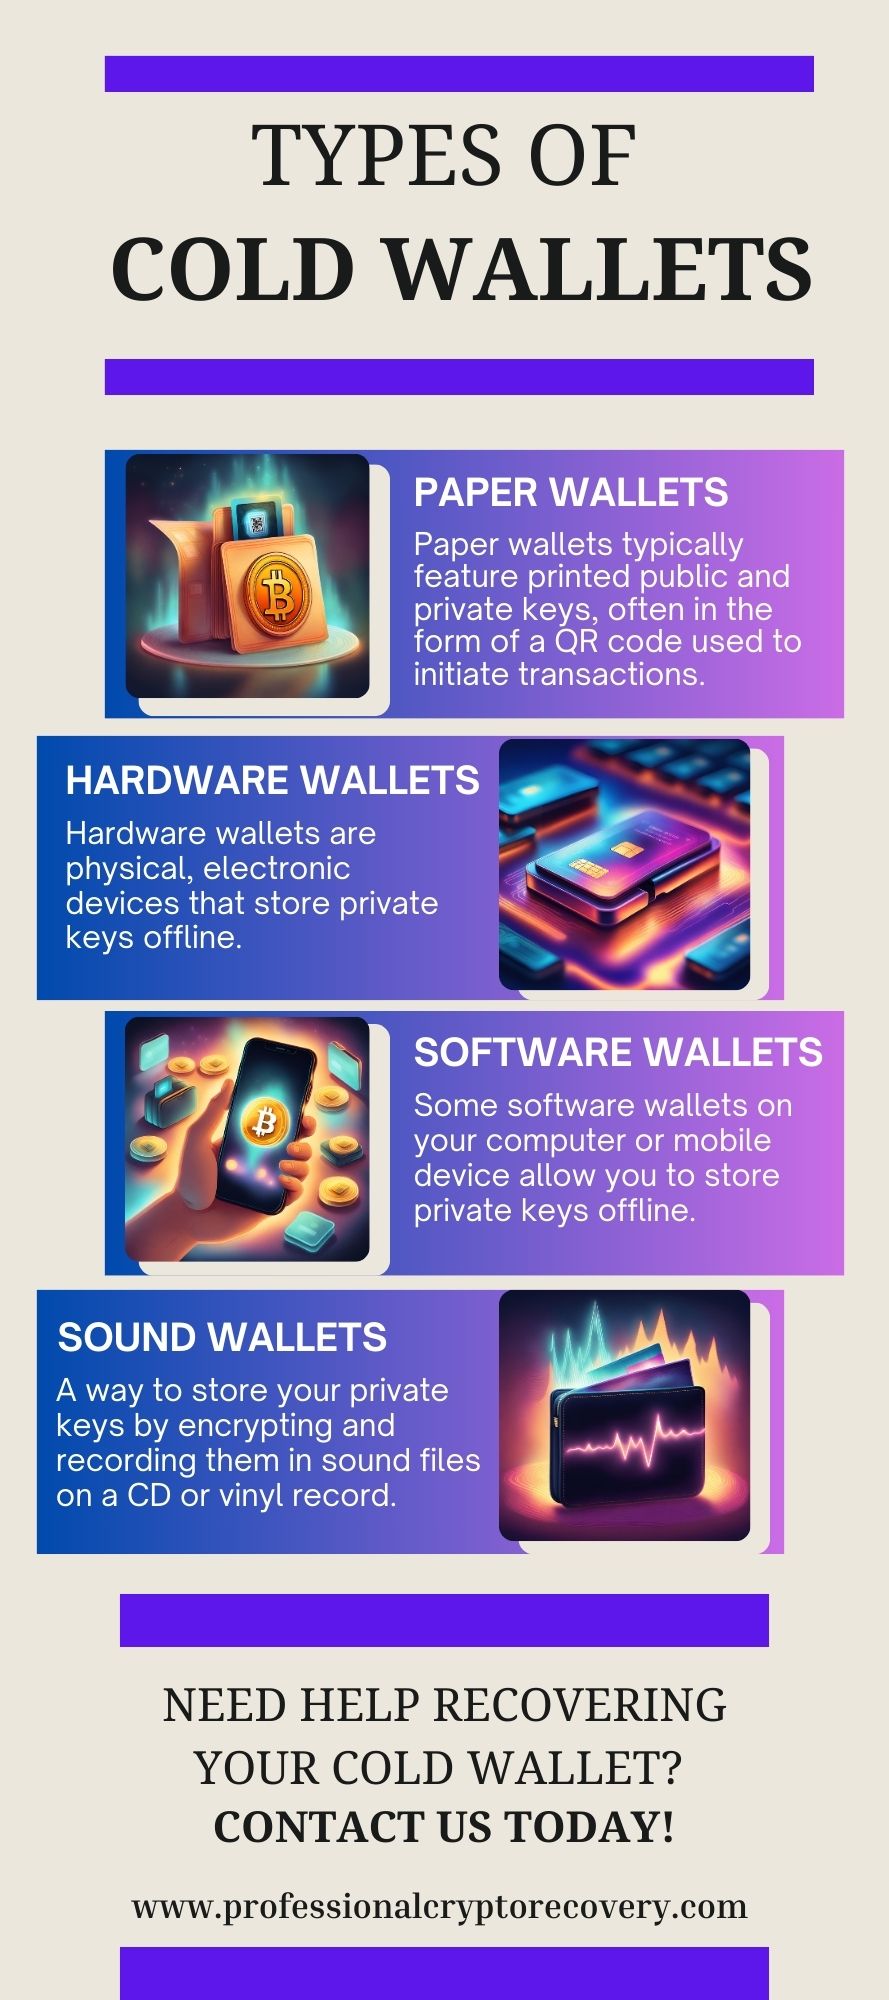 Types of Cold Wallets